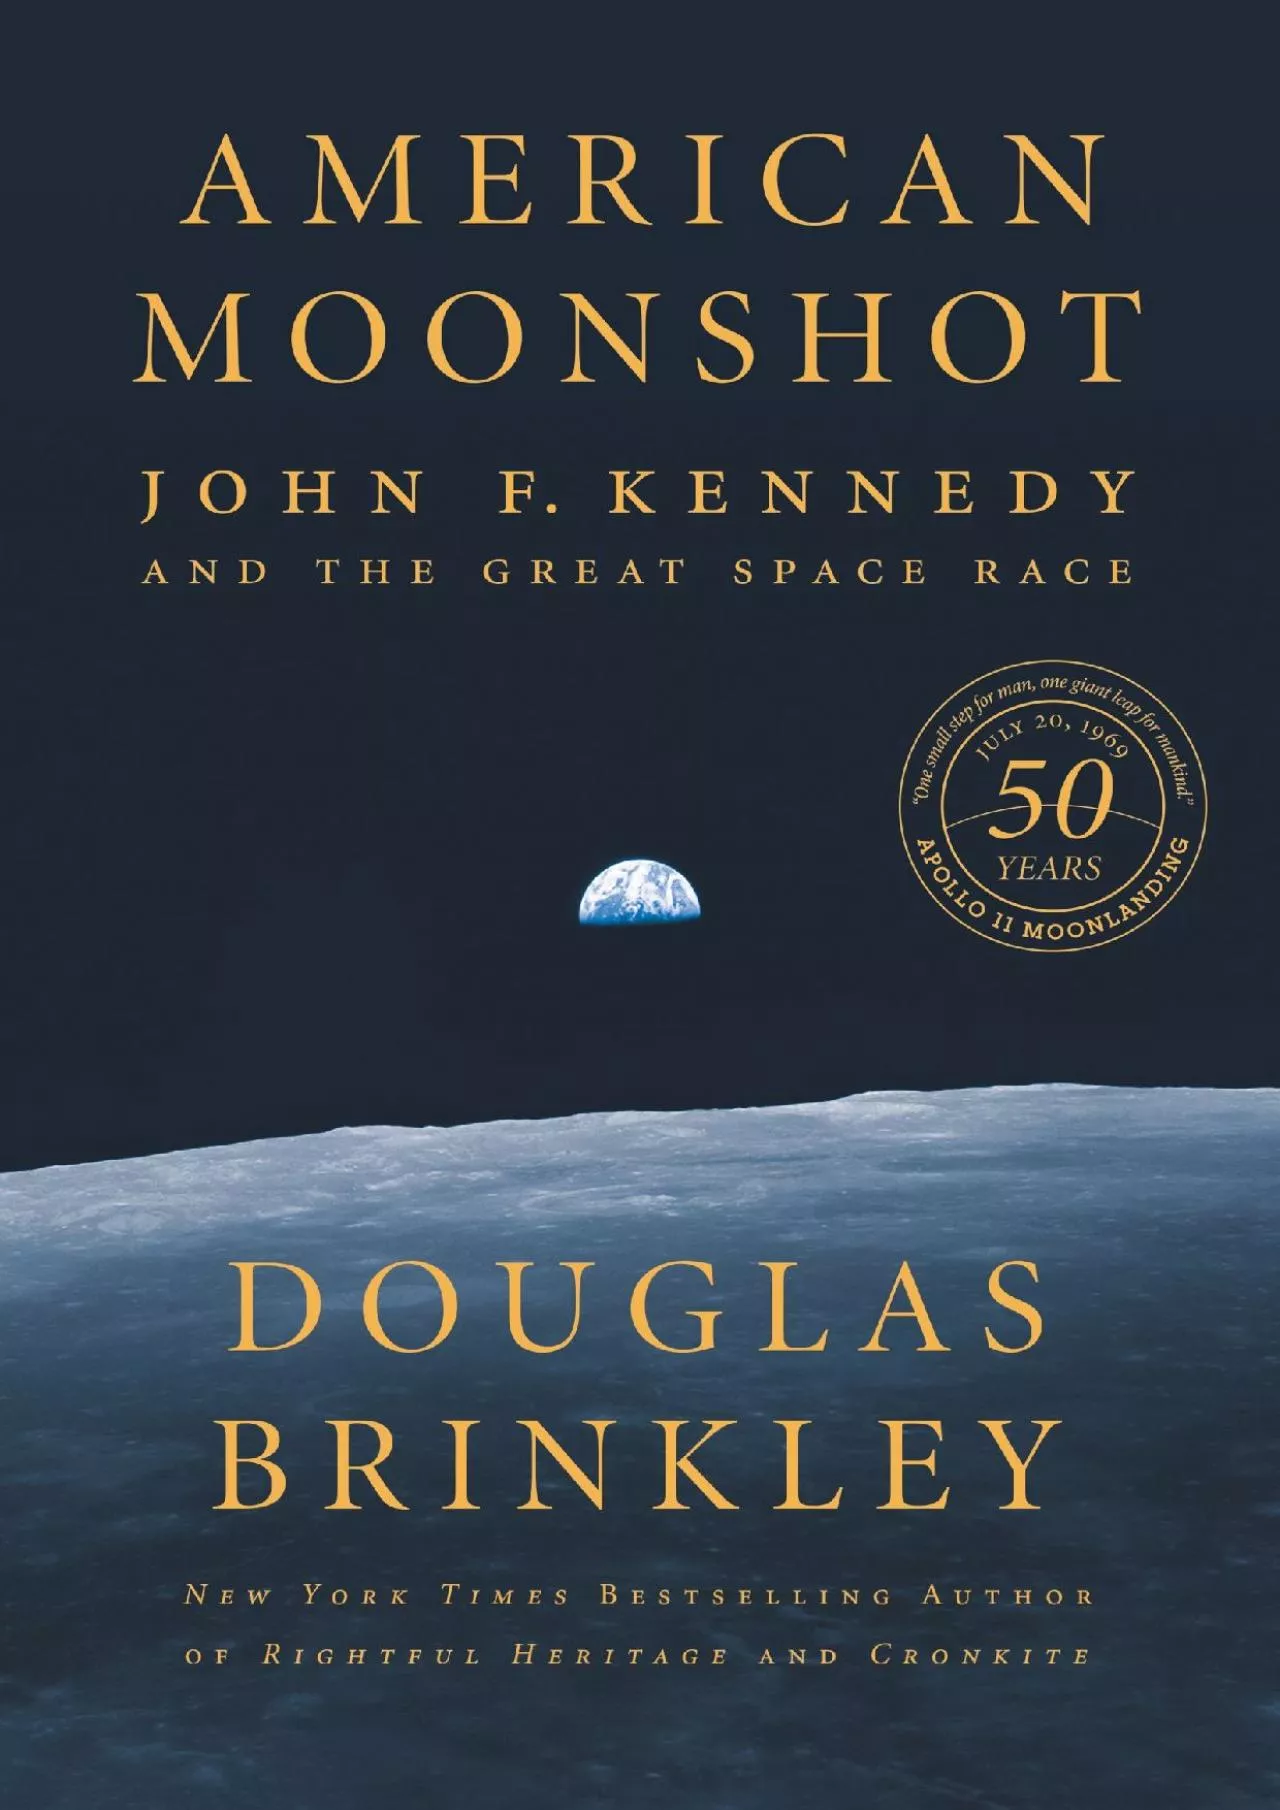 [EBOOK]-American Moonshot: John F. Kennedy and the Great Space Race